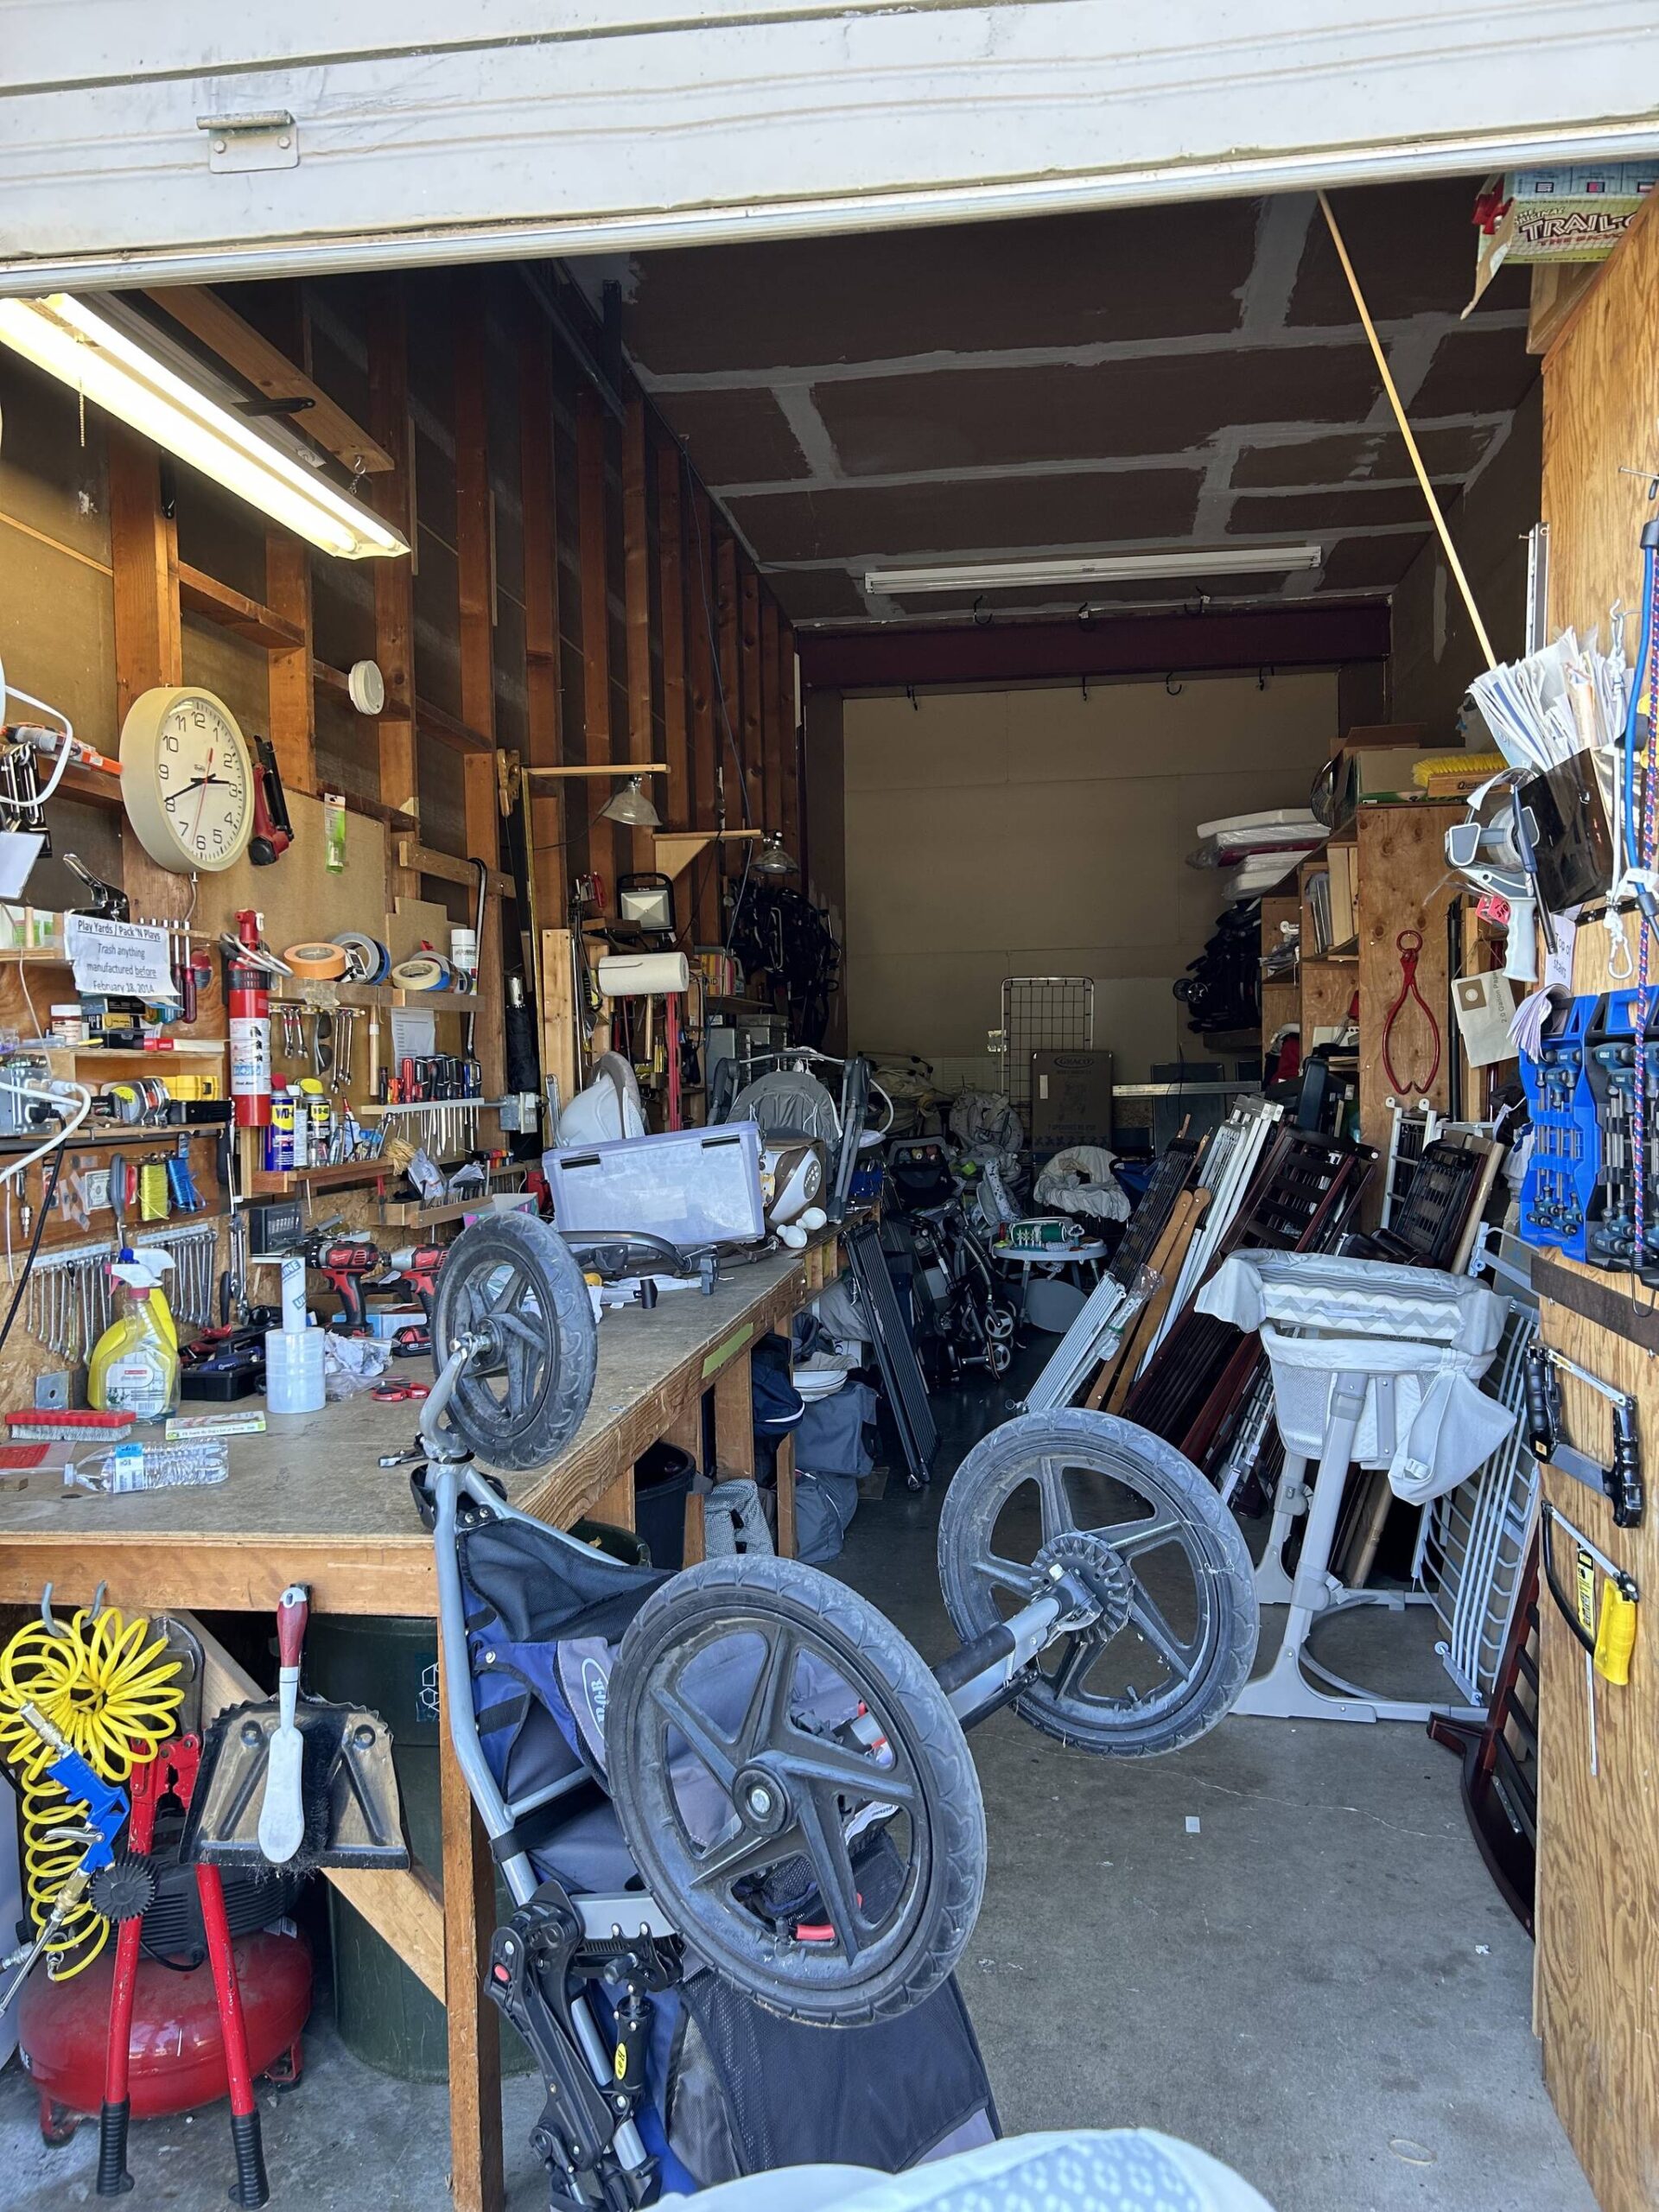 This storage unit is designated to repair hard-good items before they go out to a family. (Photo by Cameron Sires)